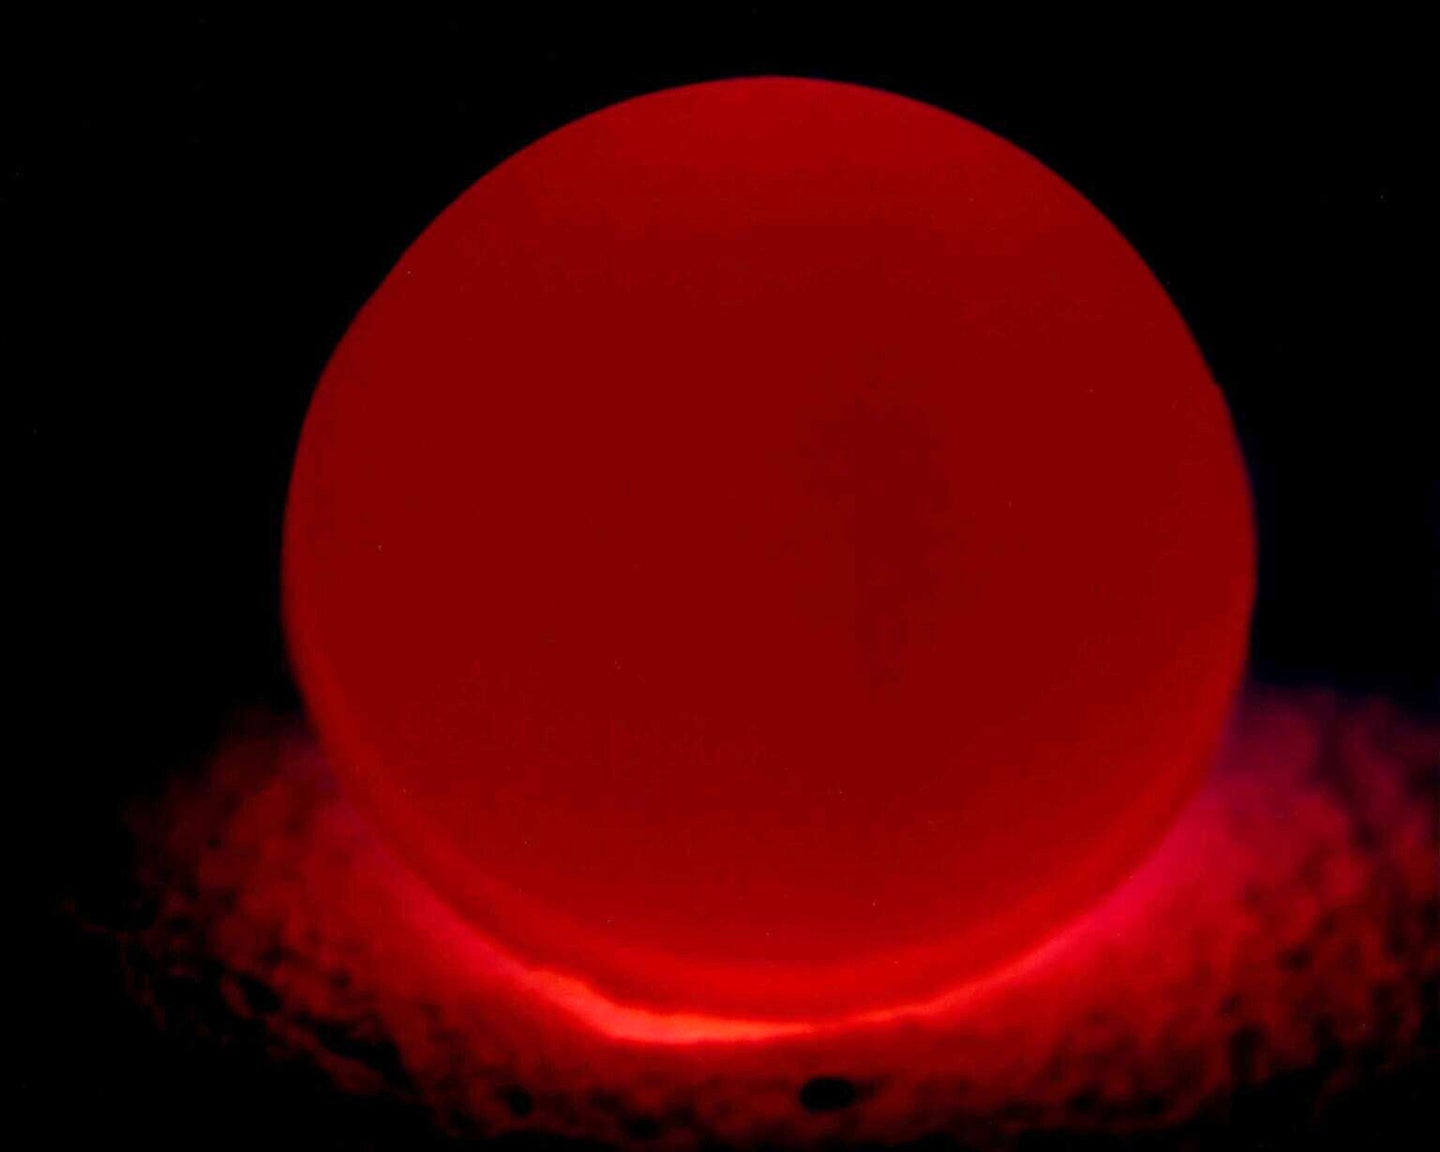 Faint red plutonium core for nuclear weapons on black